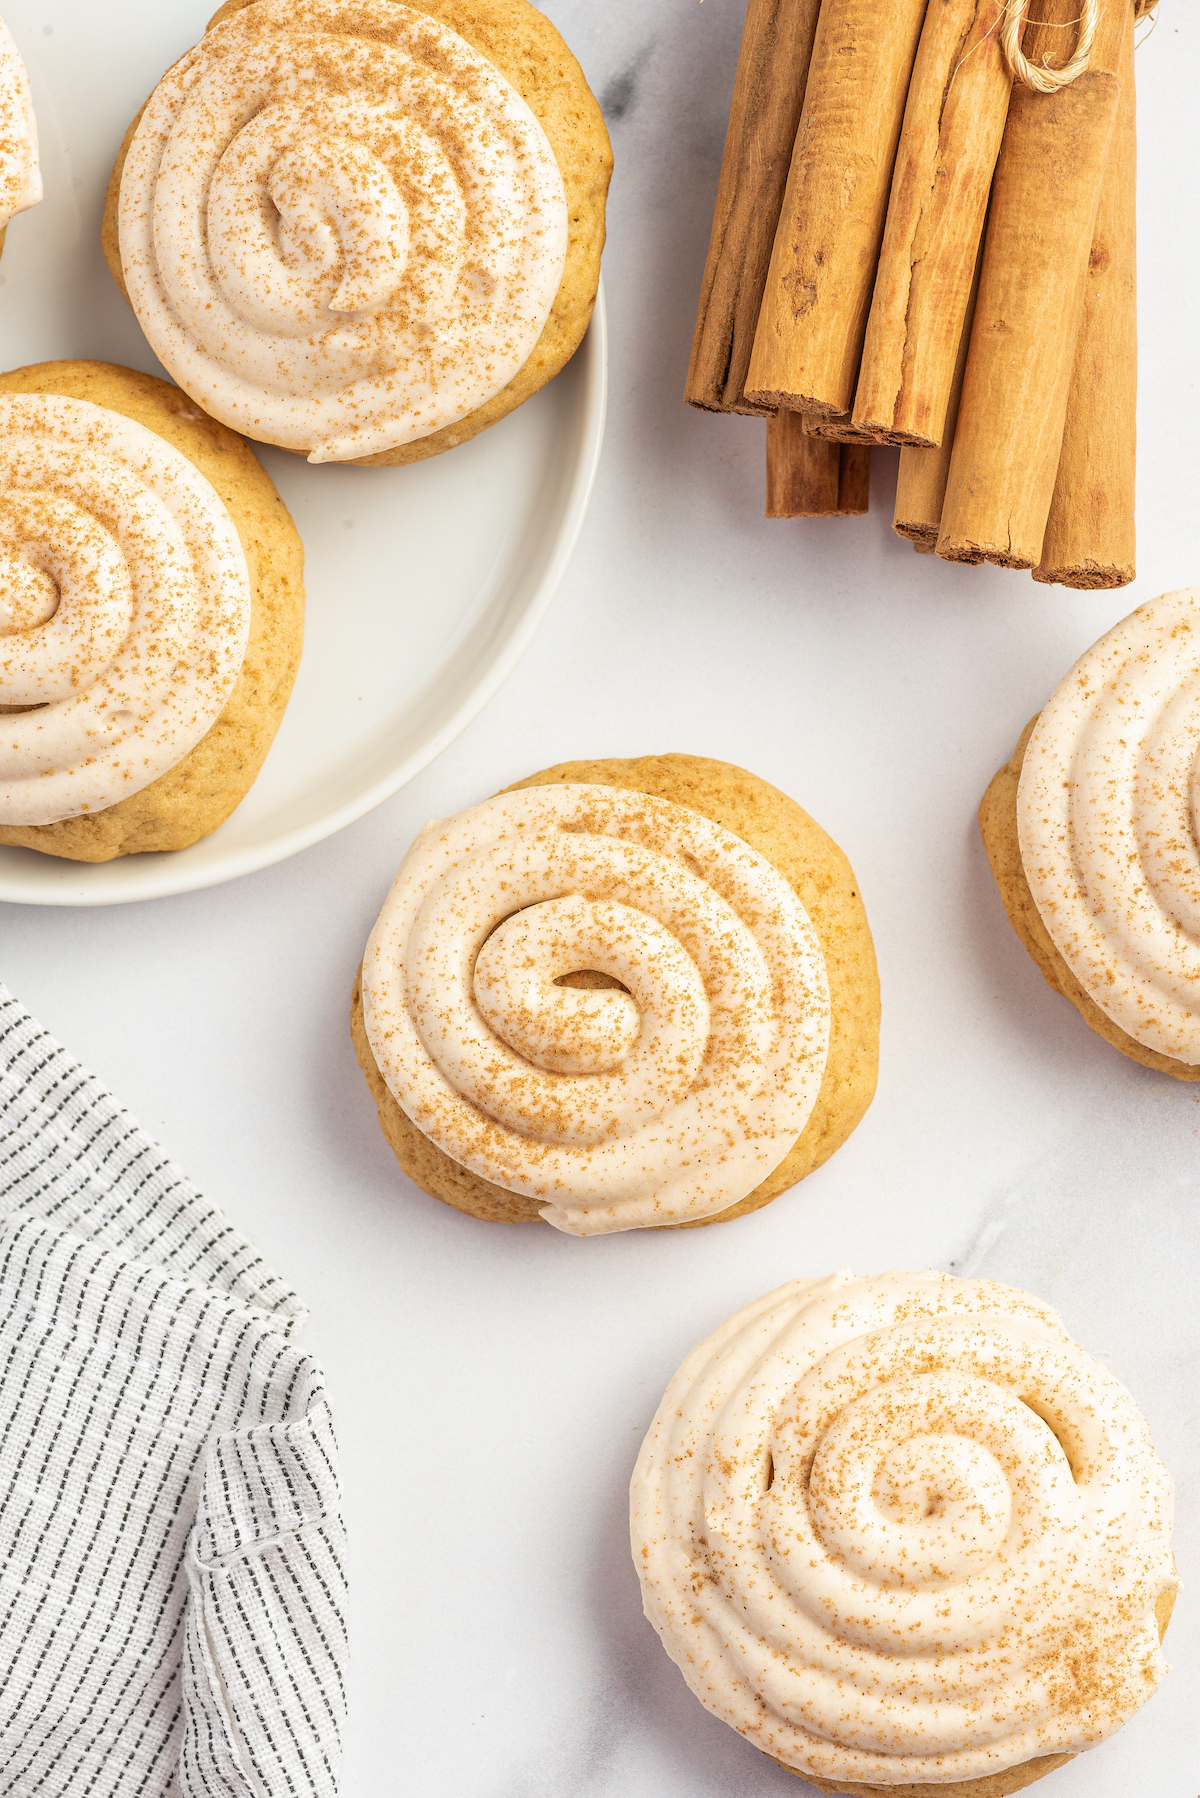 Sweet potato cookies with cream cheese frosting on a white work surface with a cloth napkin and bundle of cinnamon sticks.